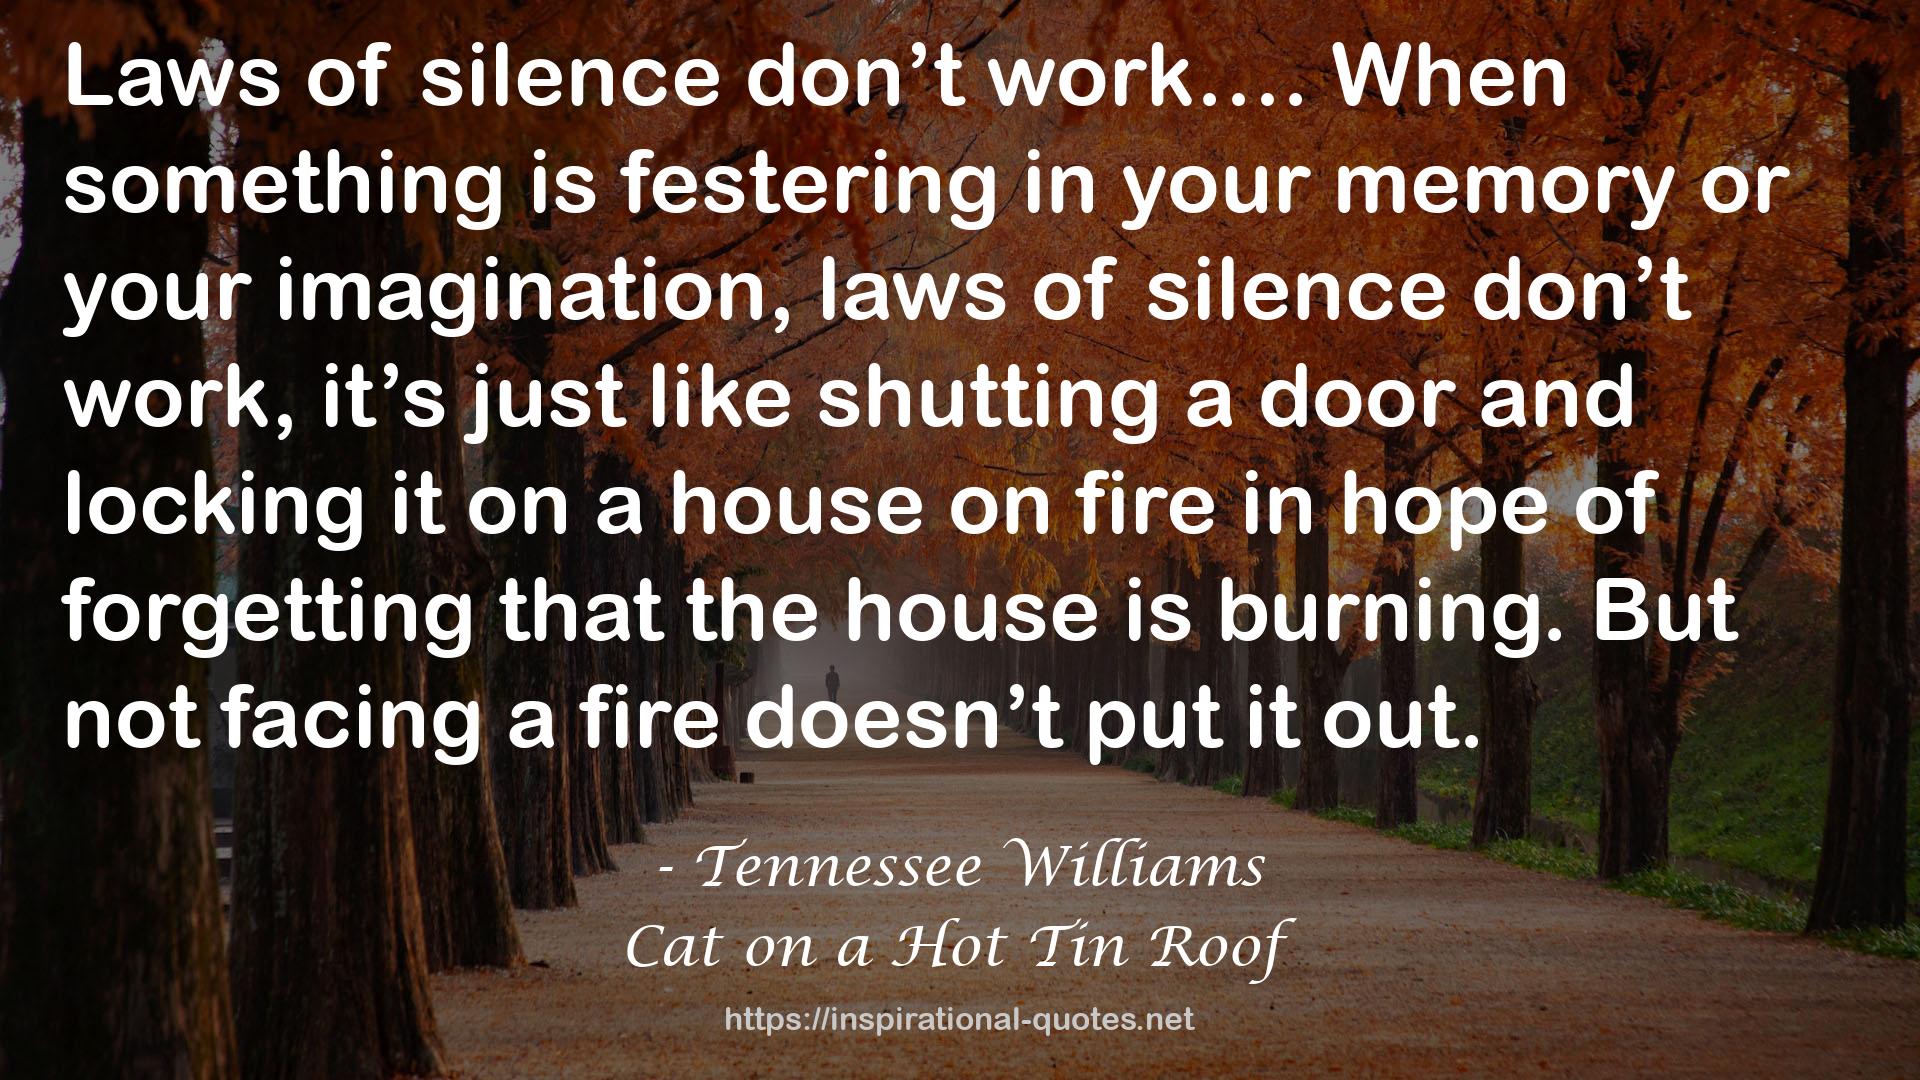 Cat on a Hot Tin Roof QUOTES